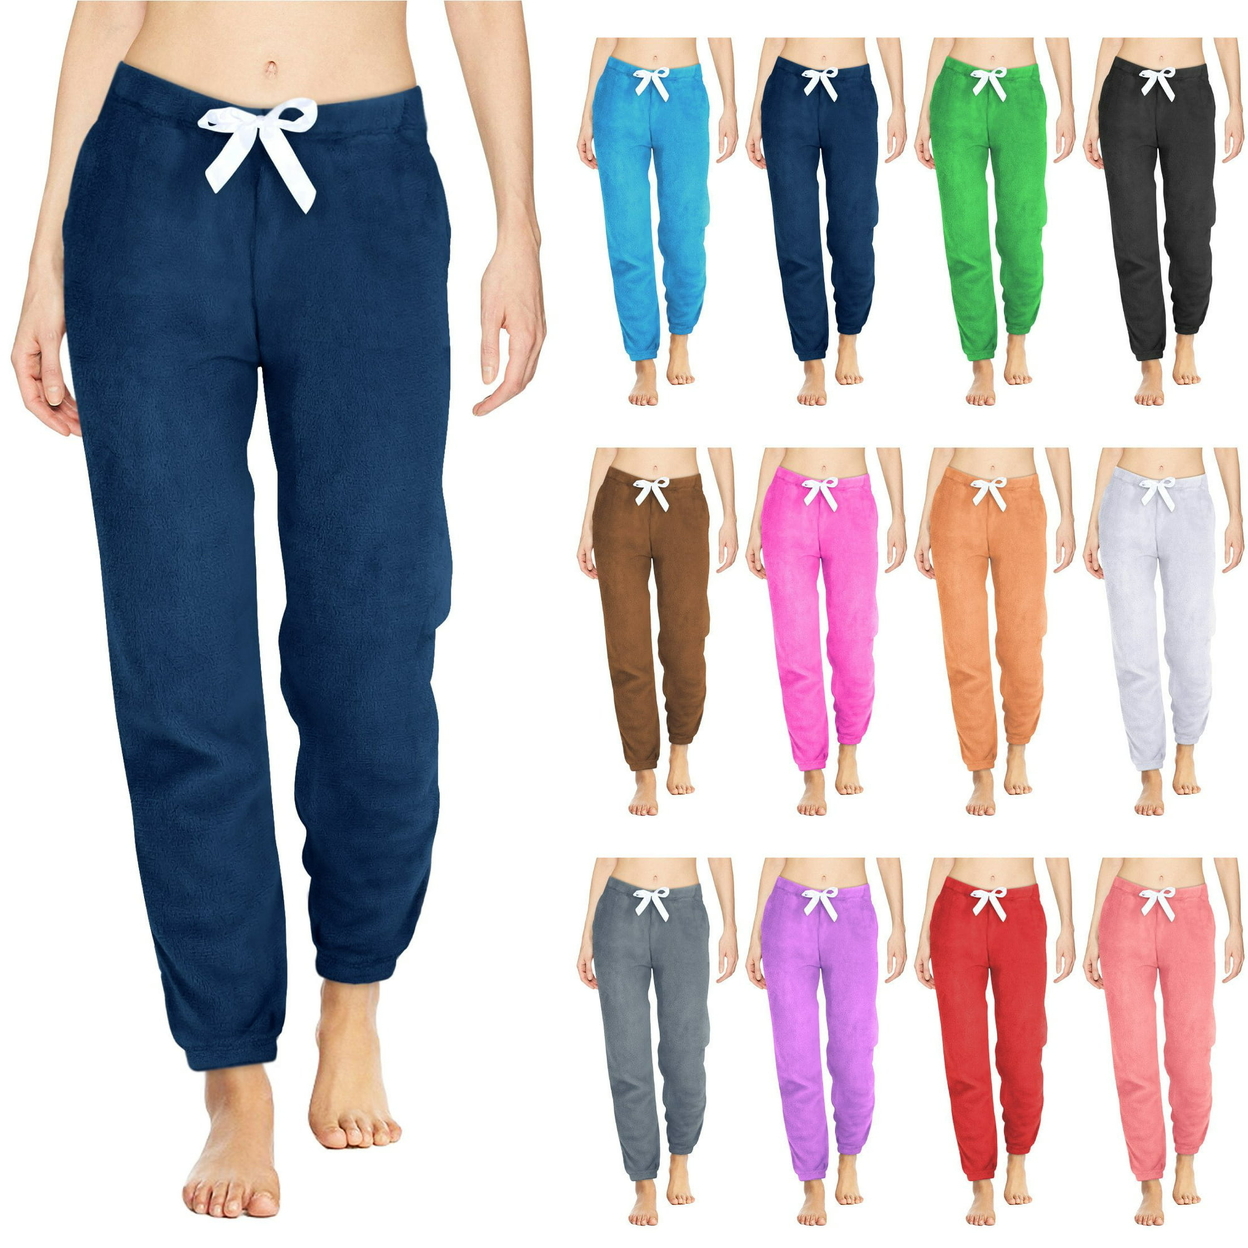 Multi-Pack: Women's Solid & Printed Ultra-Soft Comfy Stretch Micro-Fleece Pajama Lounge Pants - 3-pack, X-large, Shapes